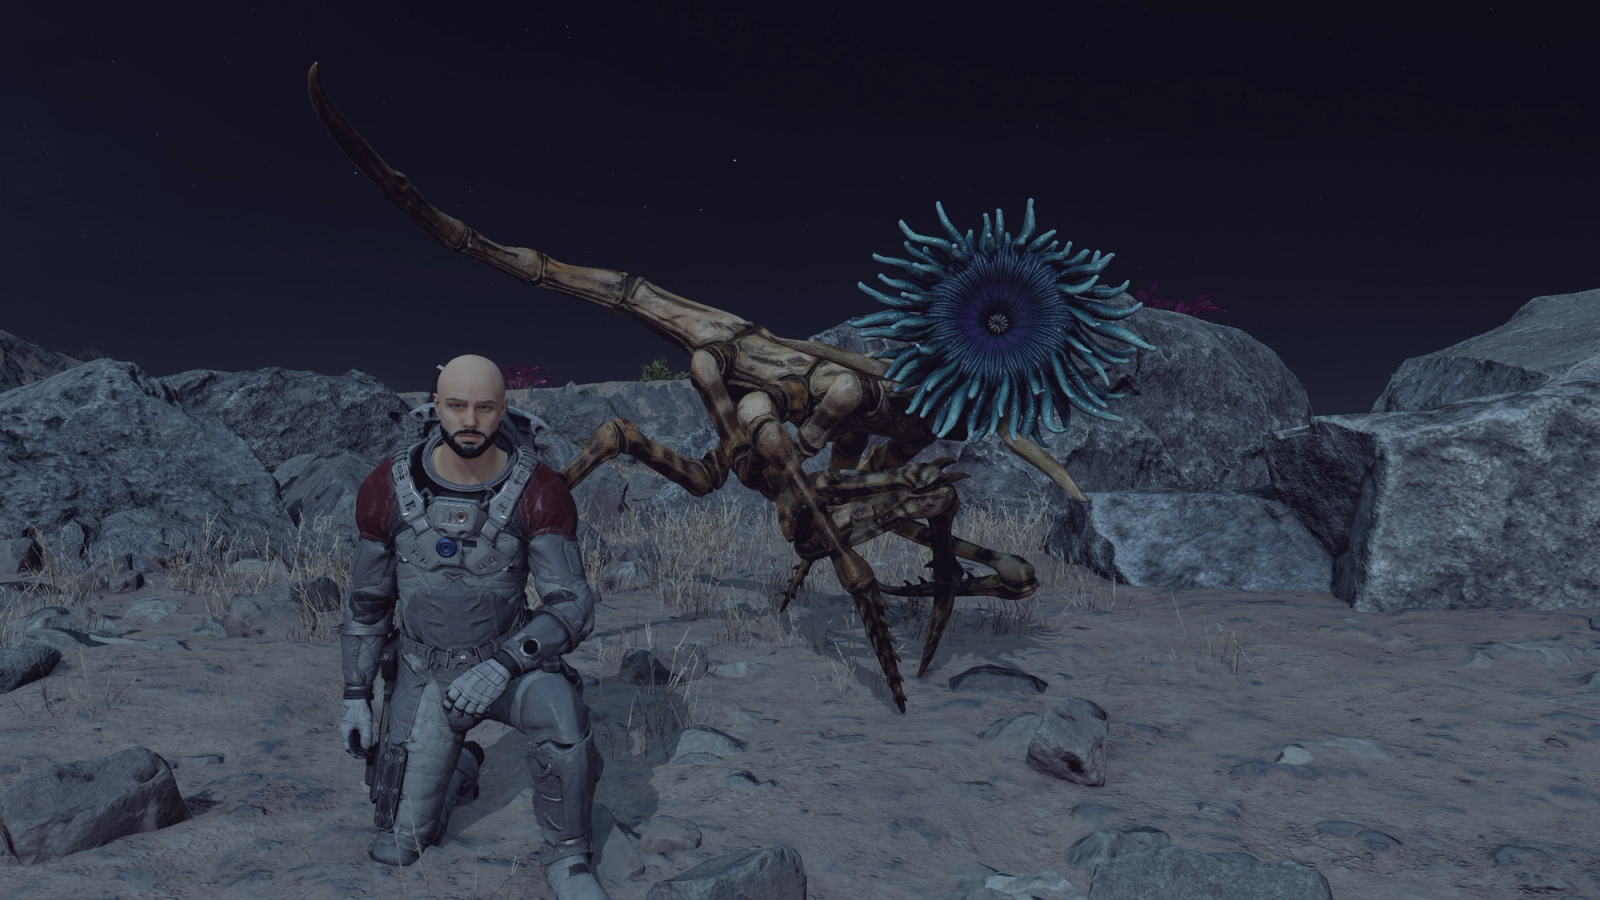 Player poses next to alien